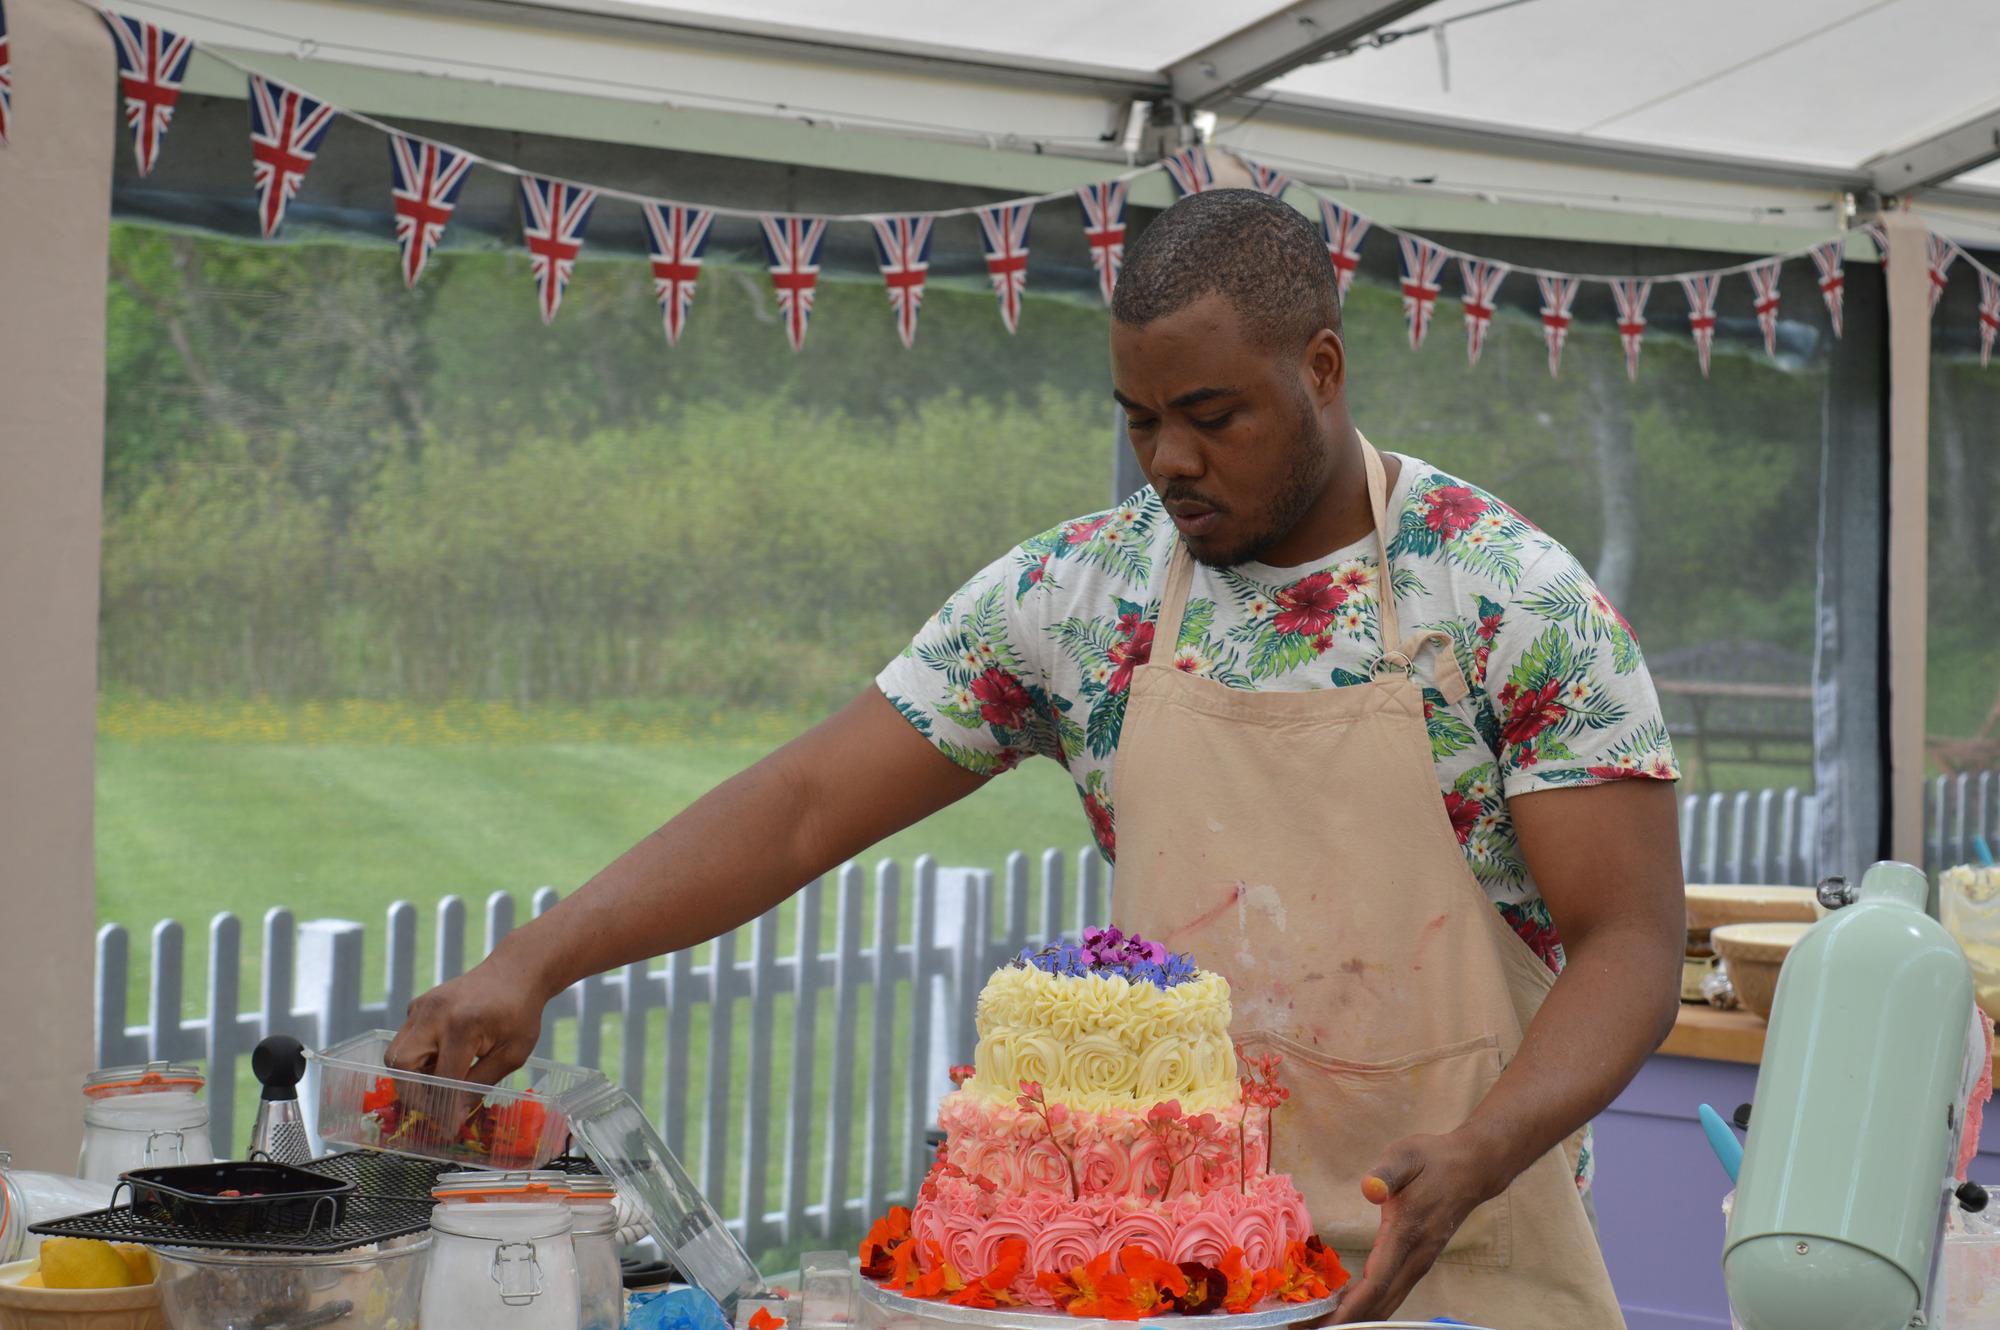 Selasi keeps his cool as usual after showing off some impressive piping skills